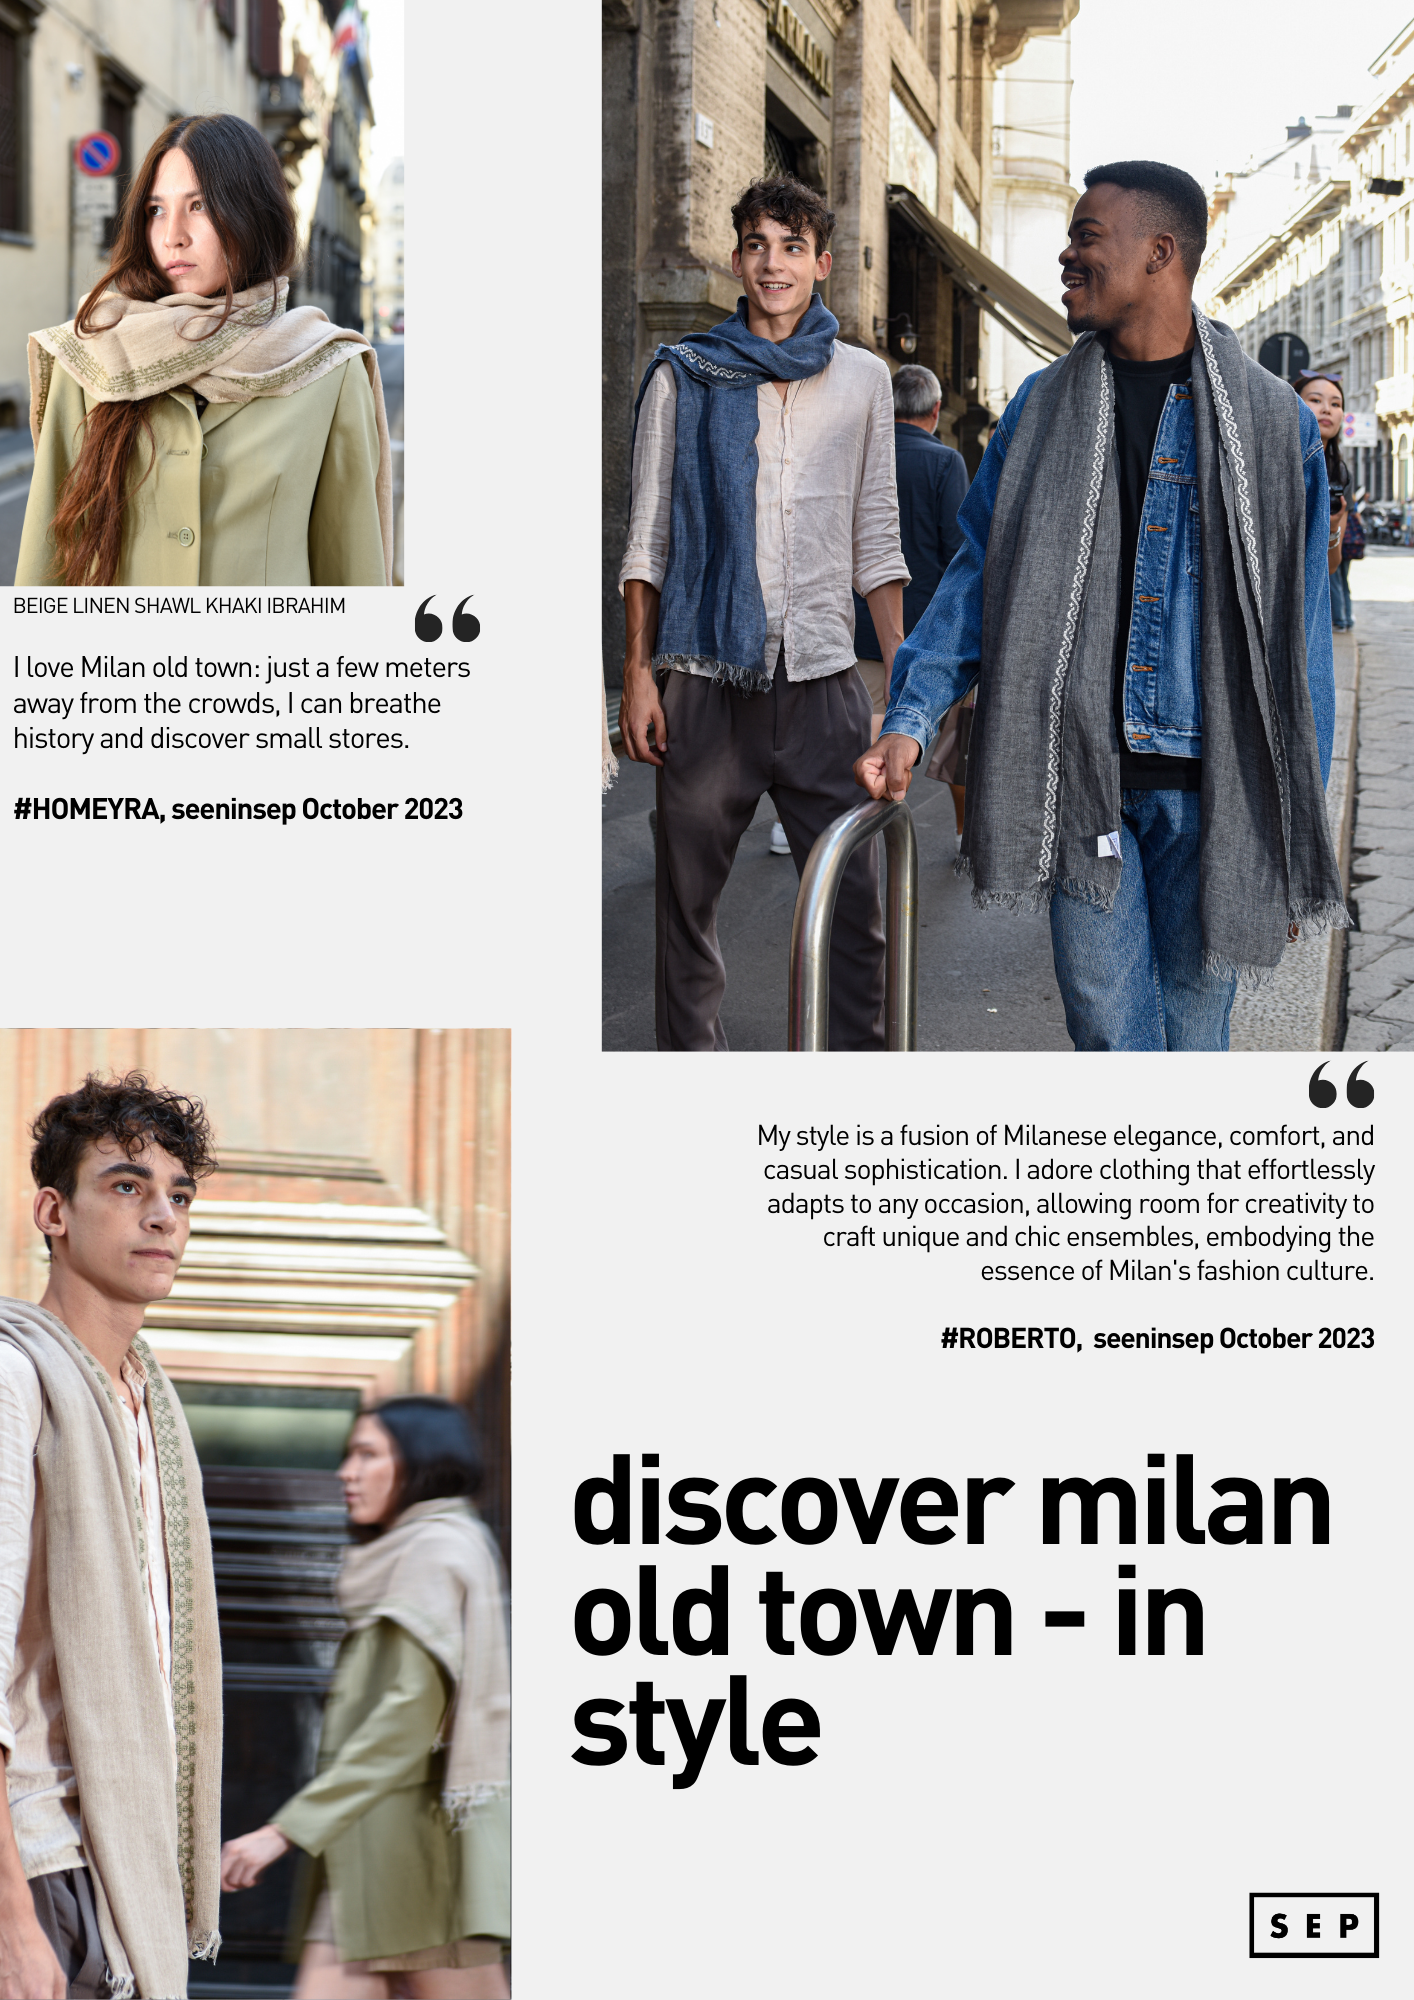 My style is a fusion of Milanese elegance, comfort, and casual sophistication. I adore clothing that effortlessly adapts to any occasion, allowing room for creativity to craft unique and chic ensembles, embodying the essence of Milan's fashion culture.  #ROBERTO,  seeninsep October 2023